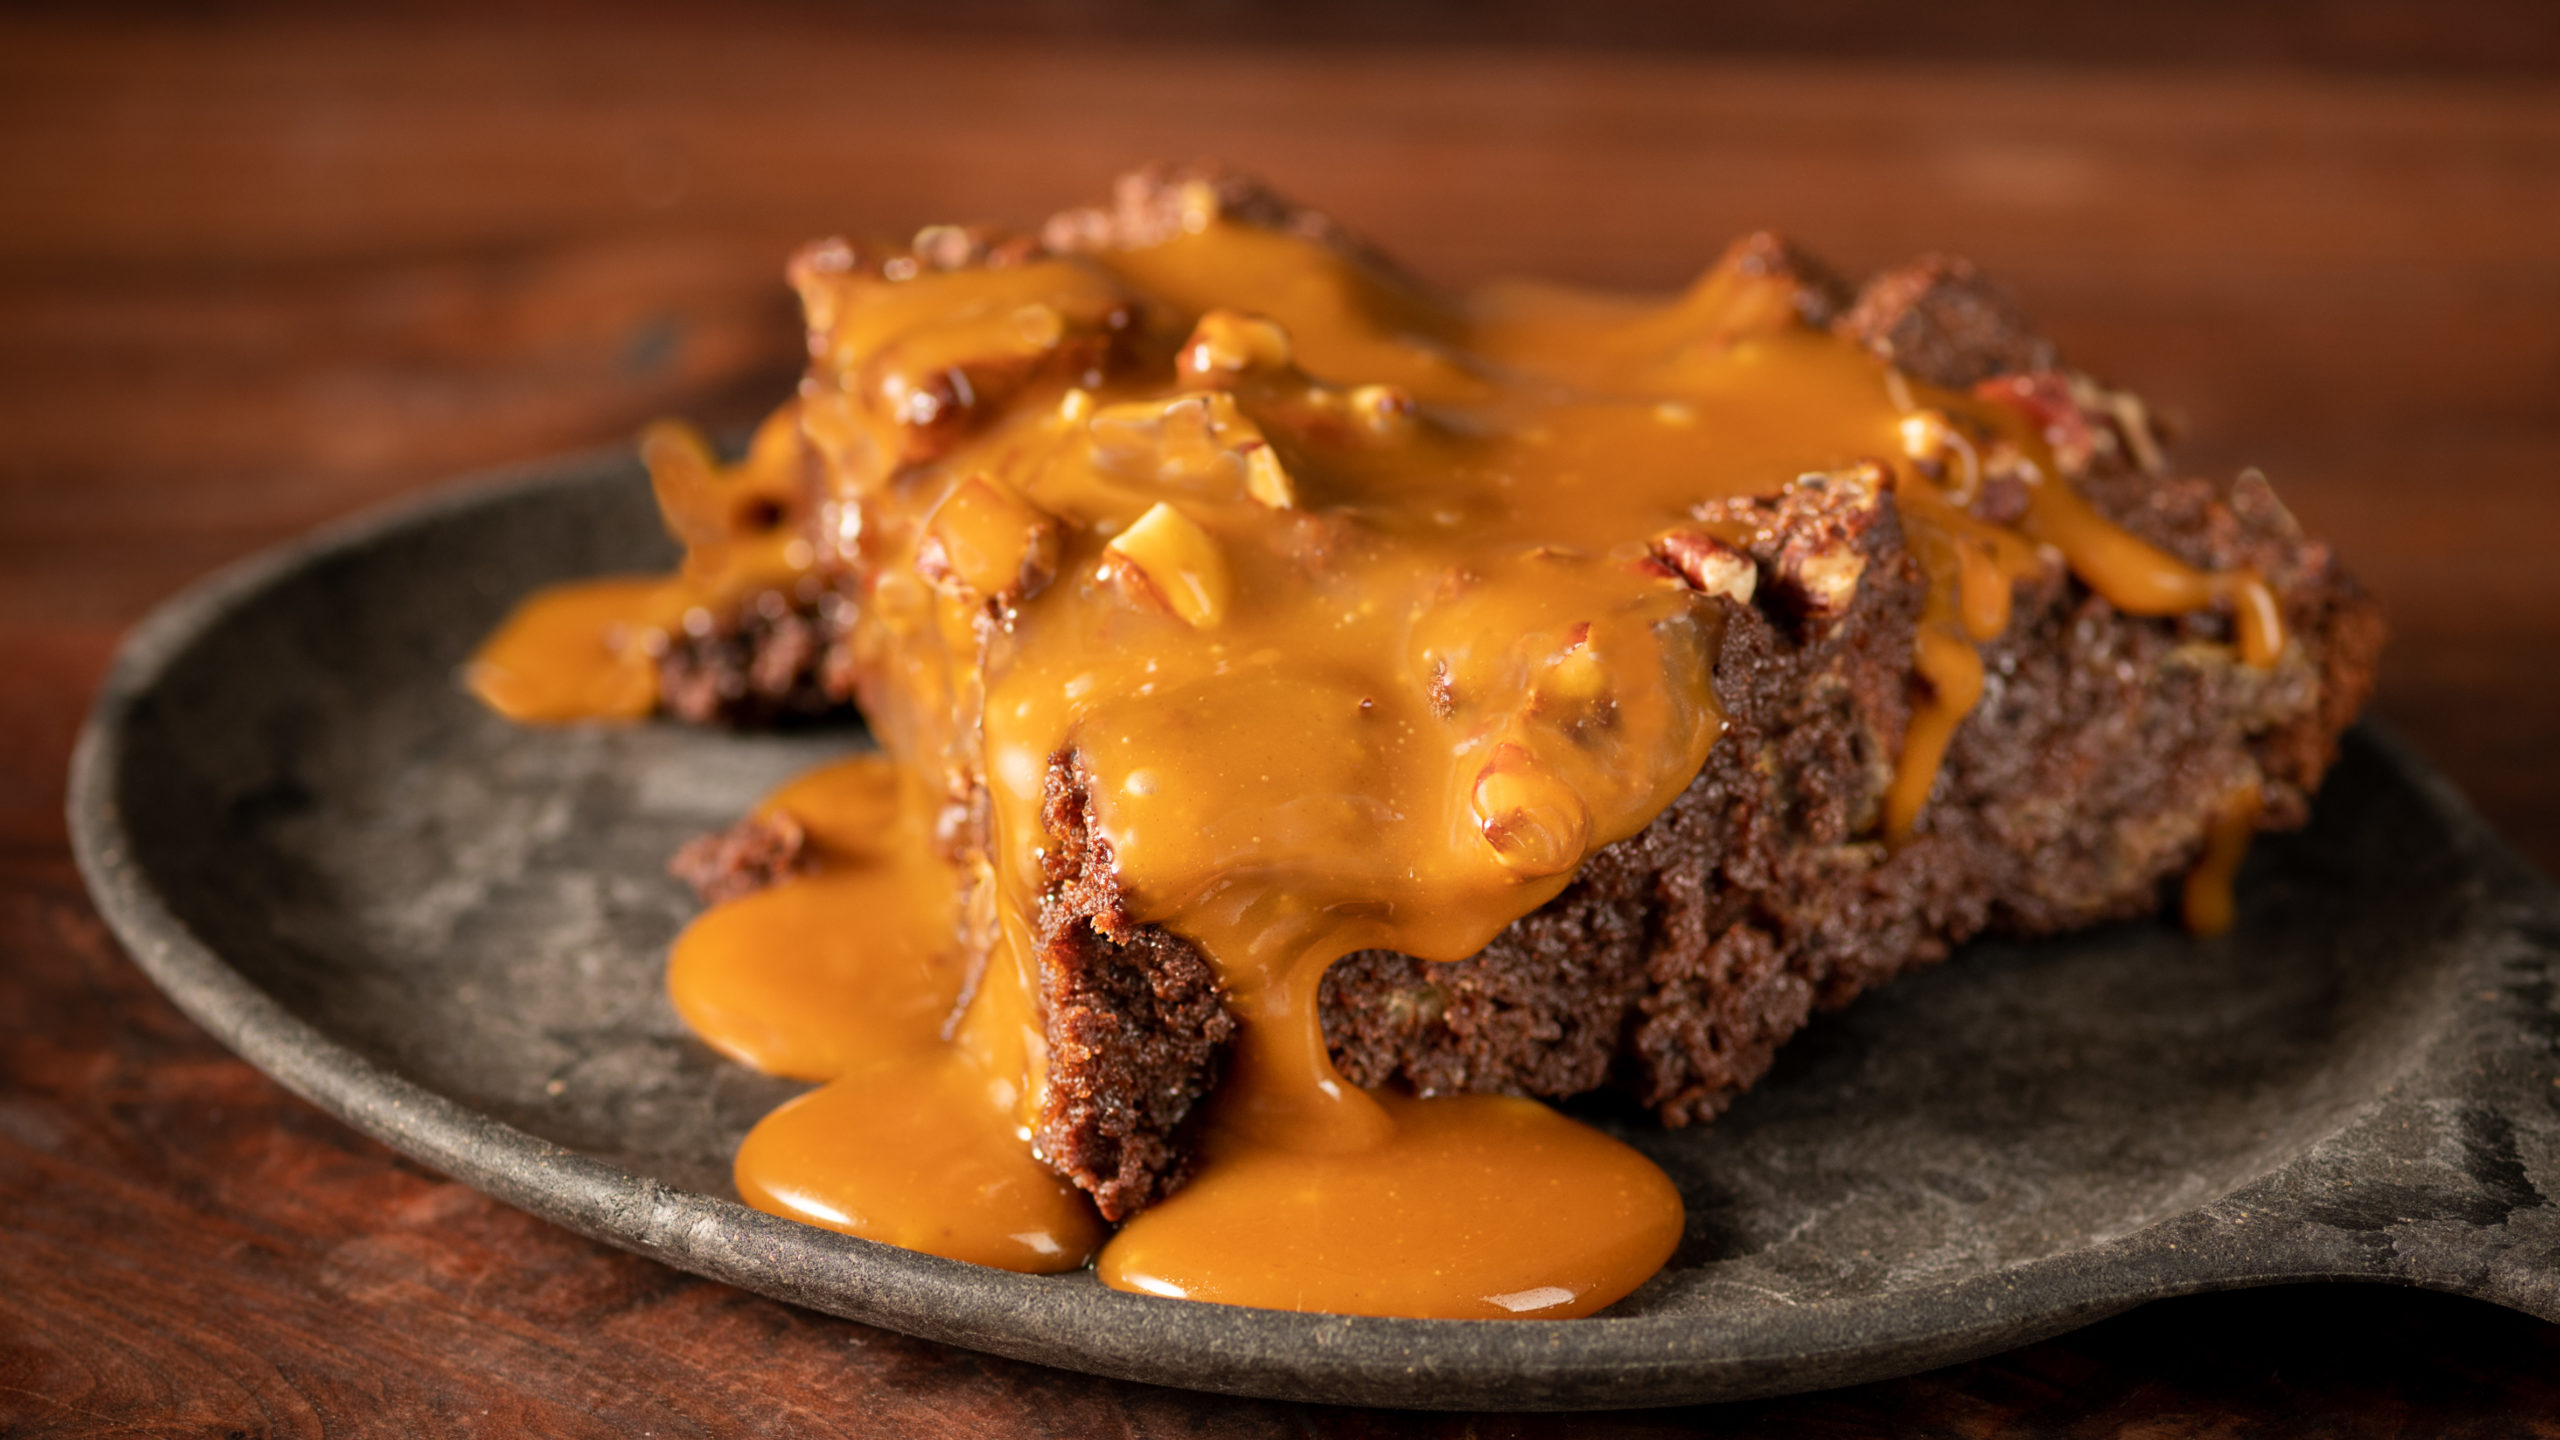 Dark Chocolate Bread Pudding with Salted Caramel Sauce